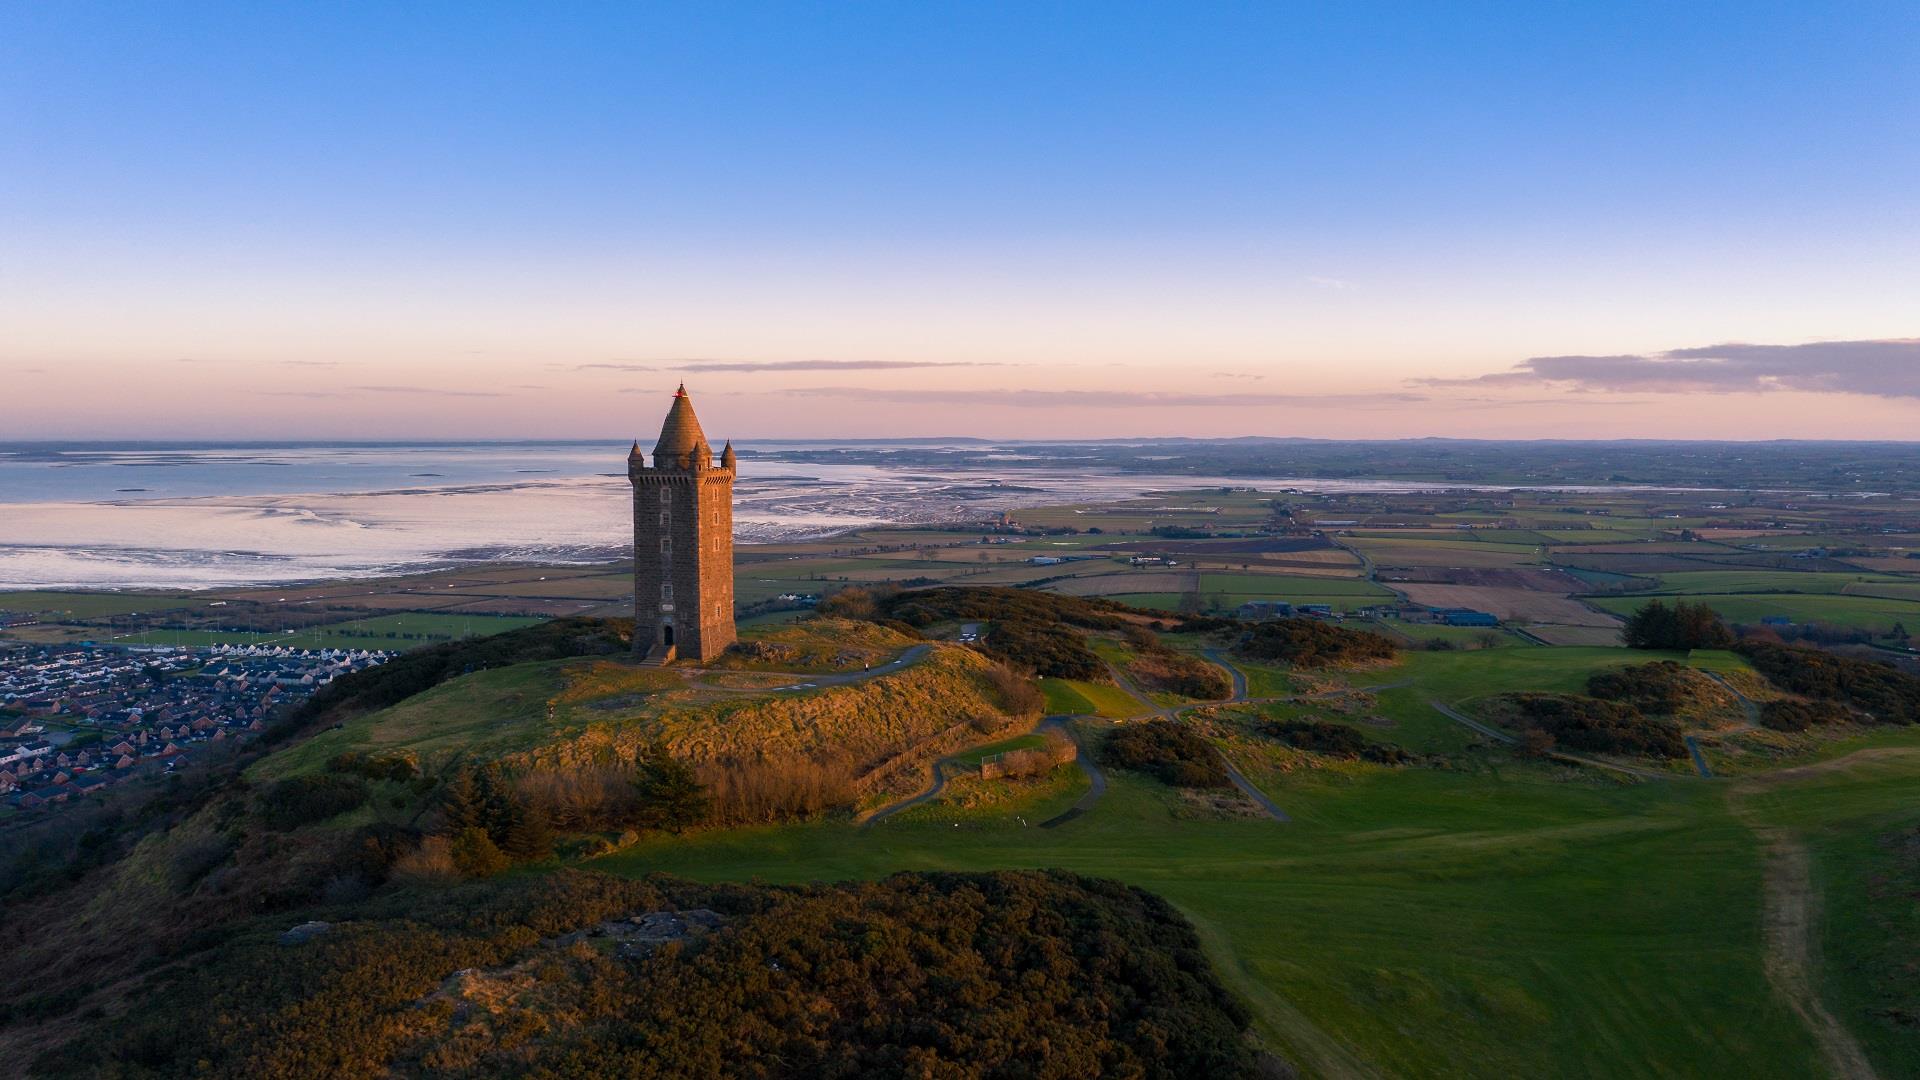 An image of Scrabo Tower at sunset with the wash of Strangford Lough in the background, Newtownards town and the surrounding landscapes and drumlins